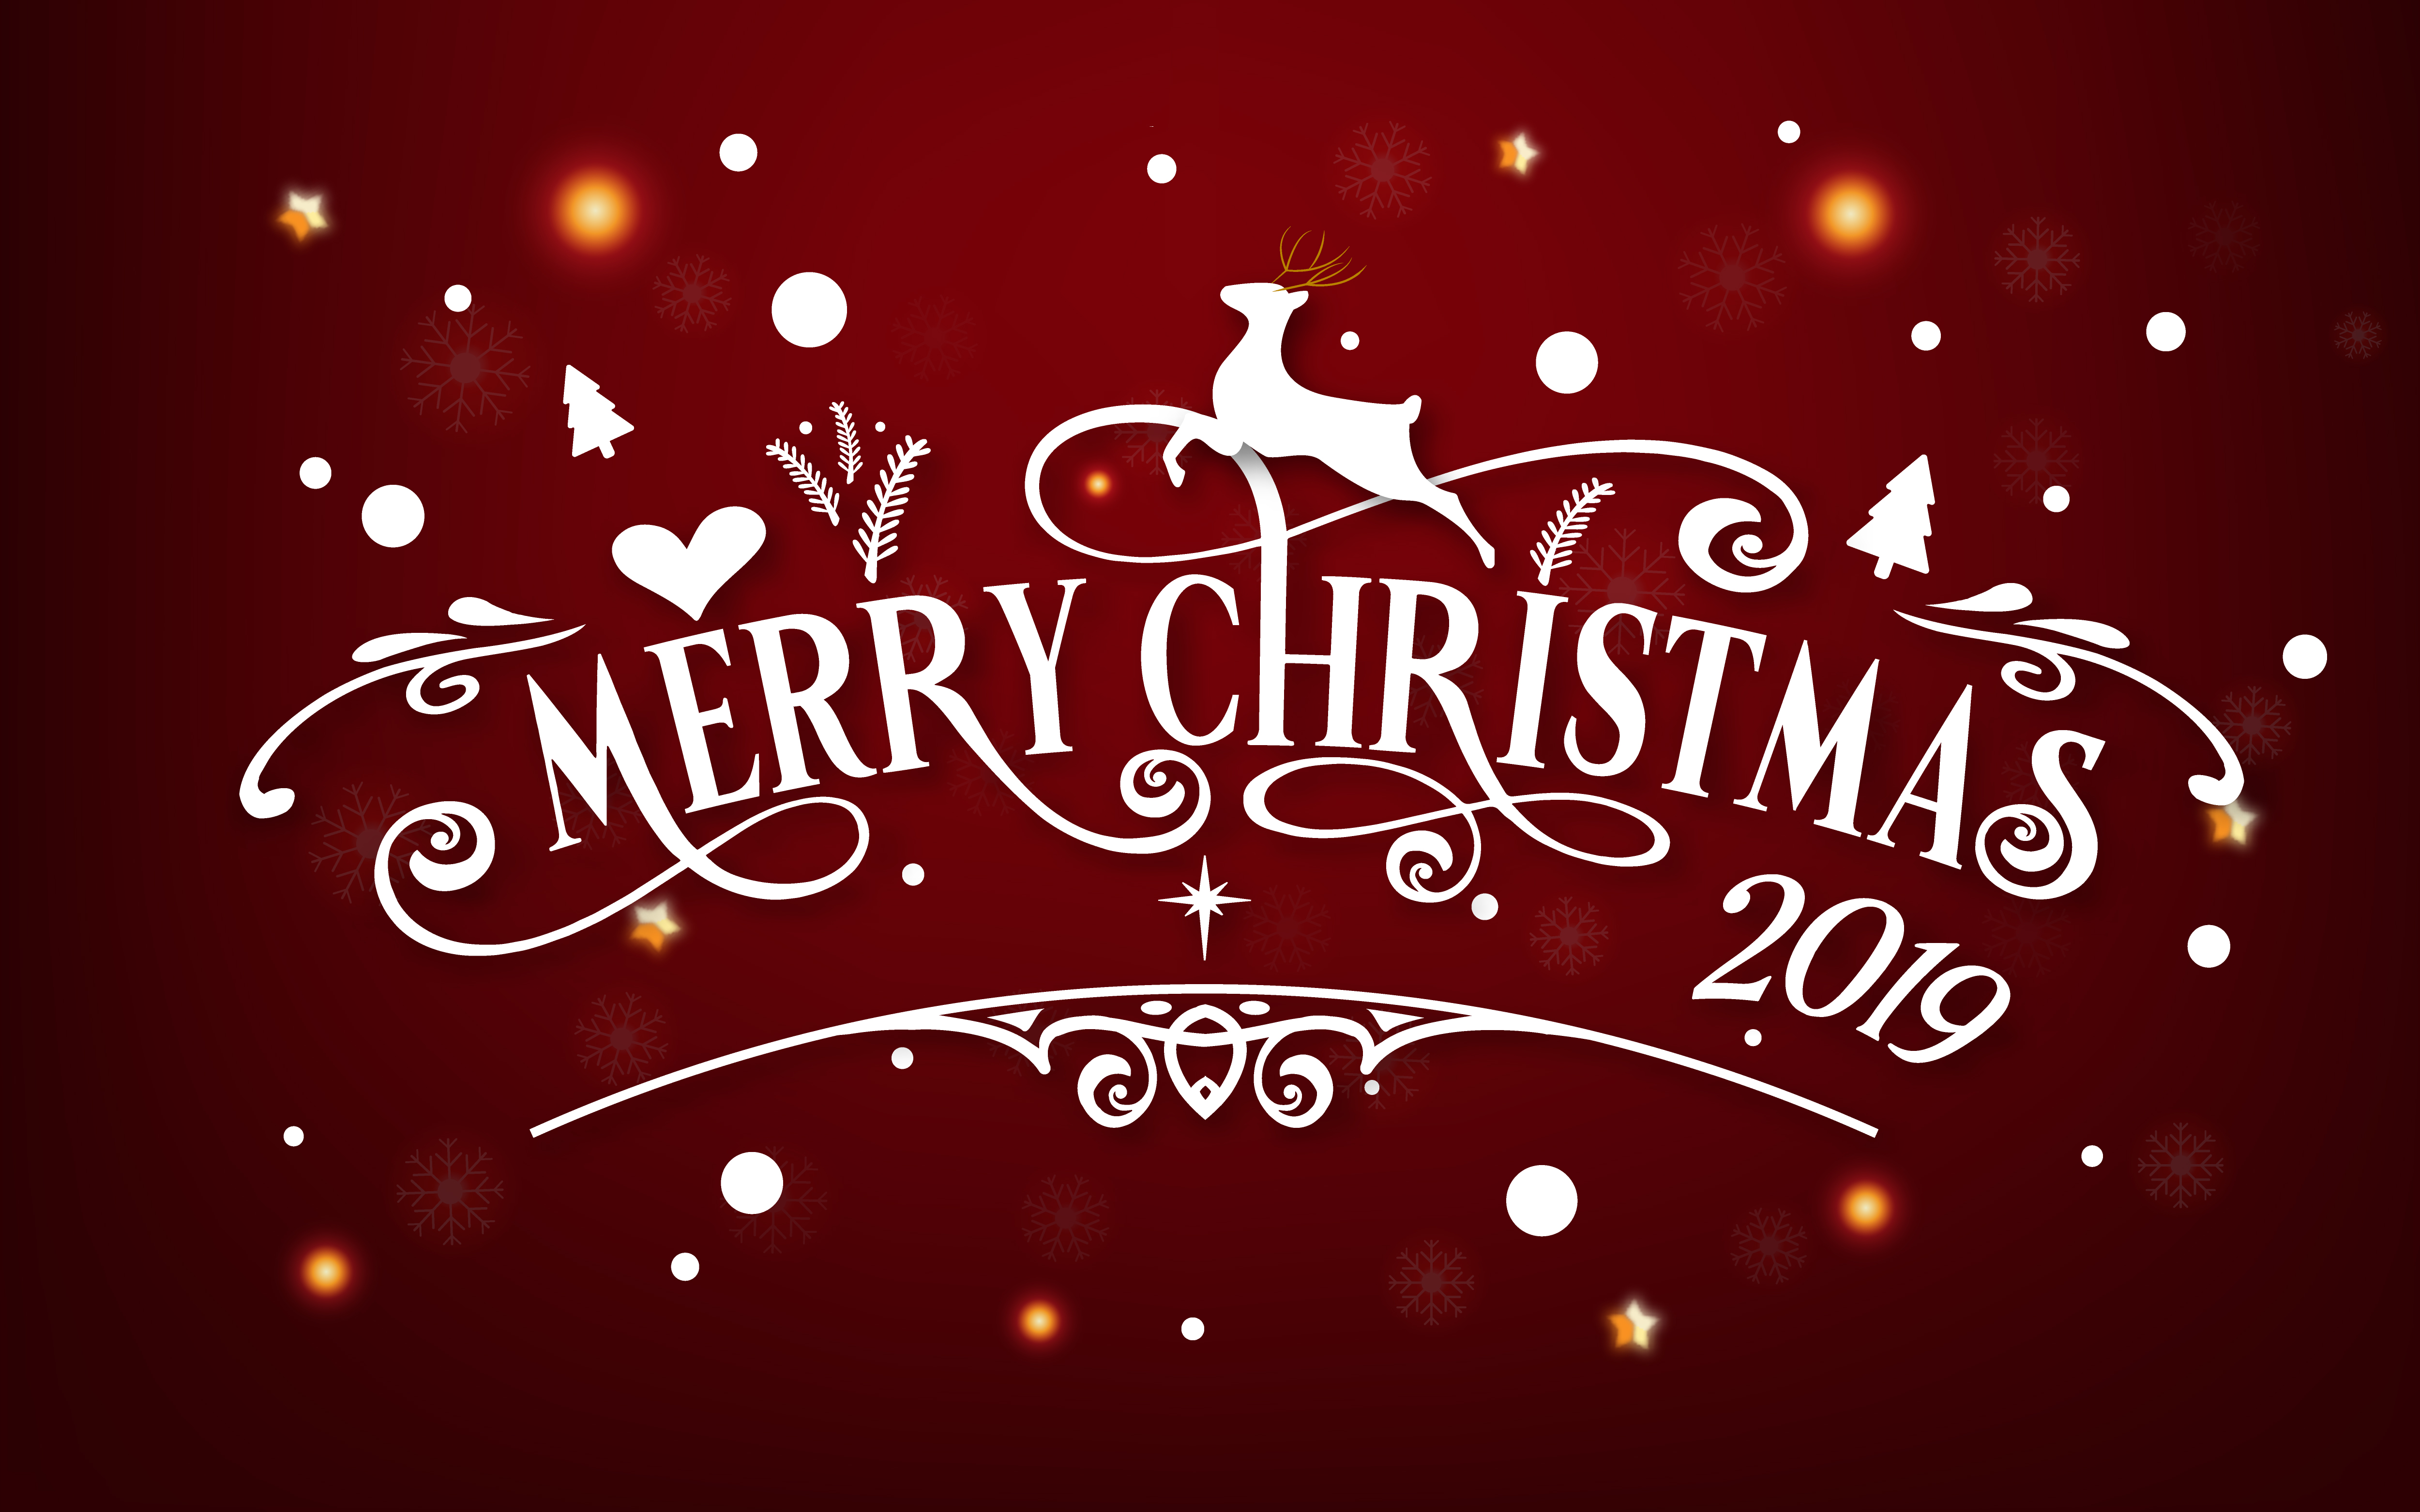 Merry Christmas day 2019. Happy new year and Xmas festival end year party message text ...